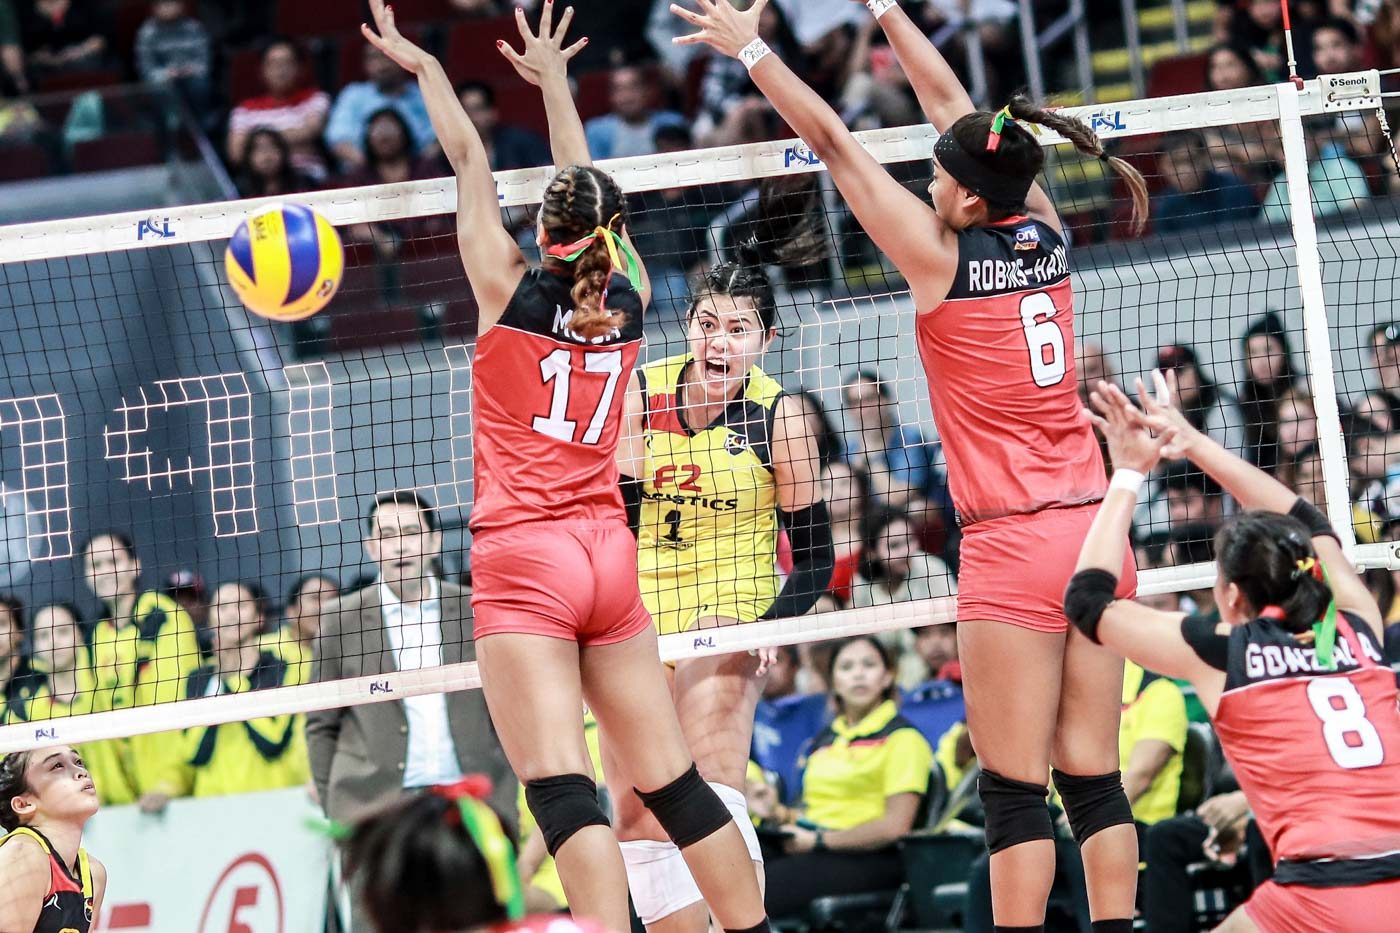 PSL pours in support for 2019 SEA Games volleyball